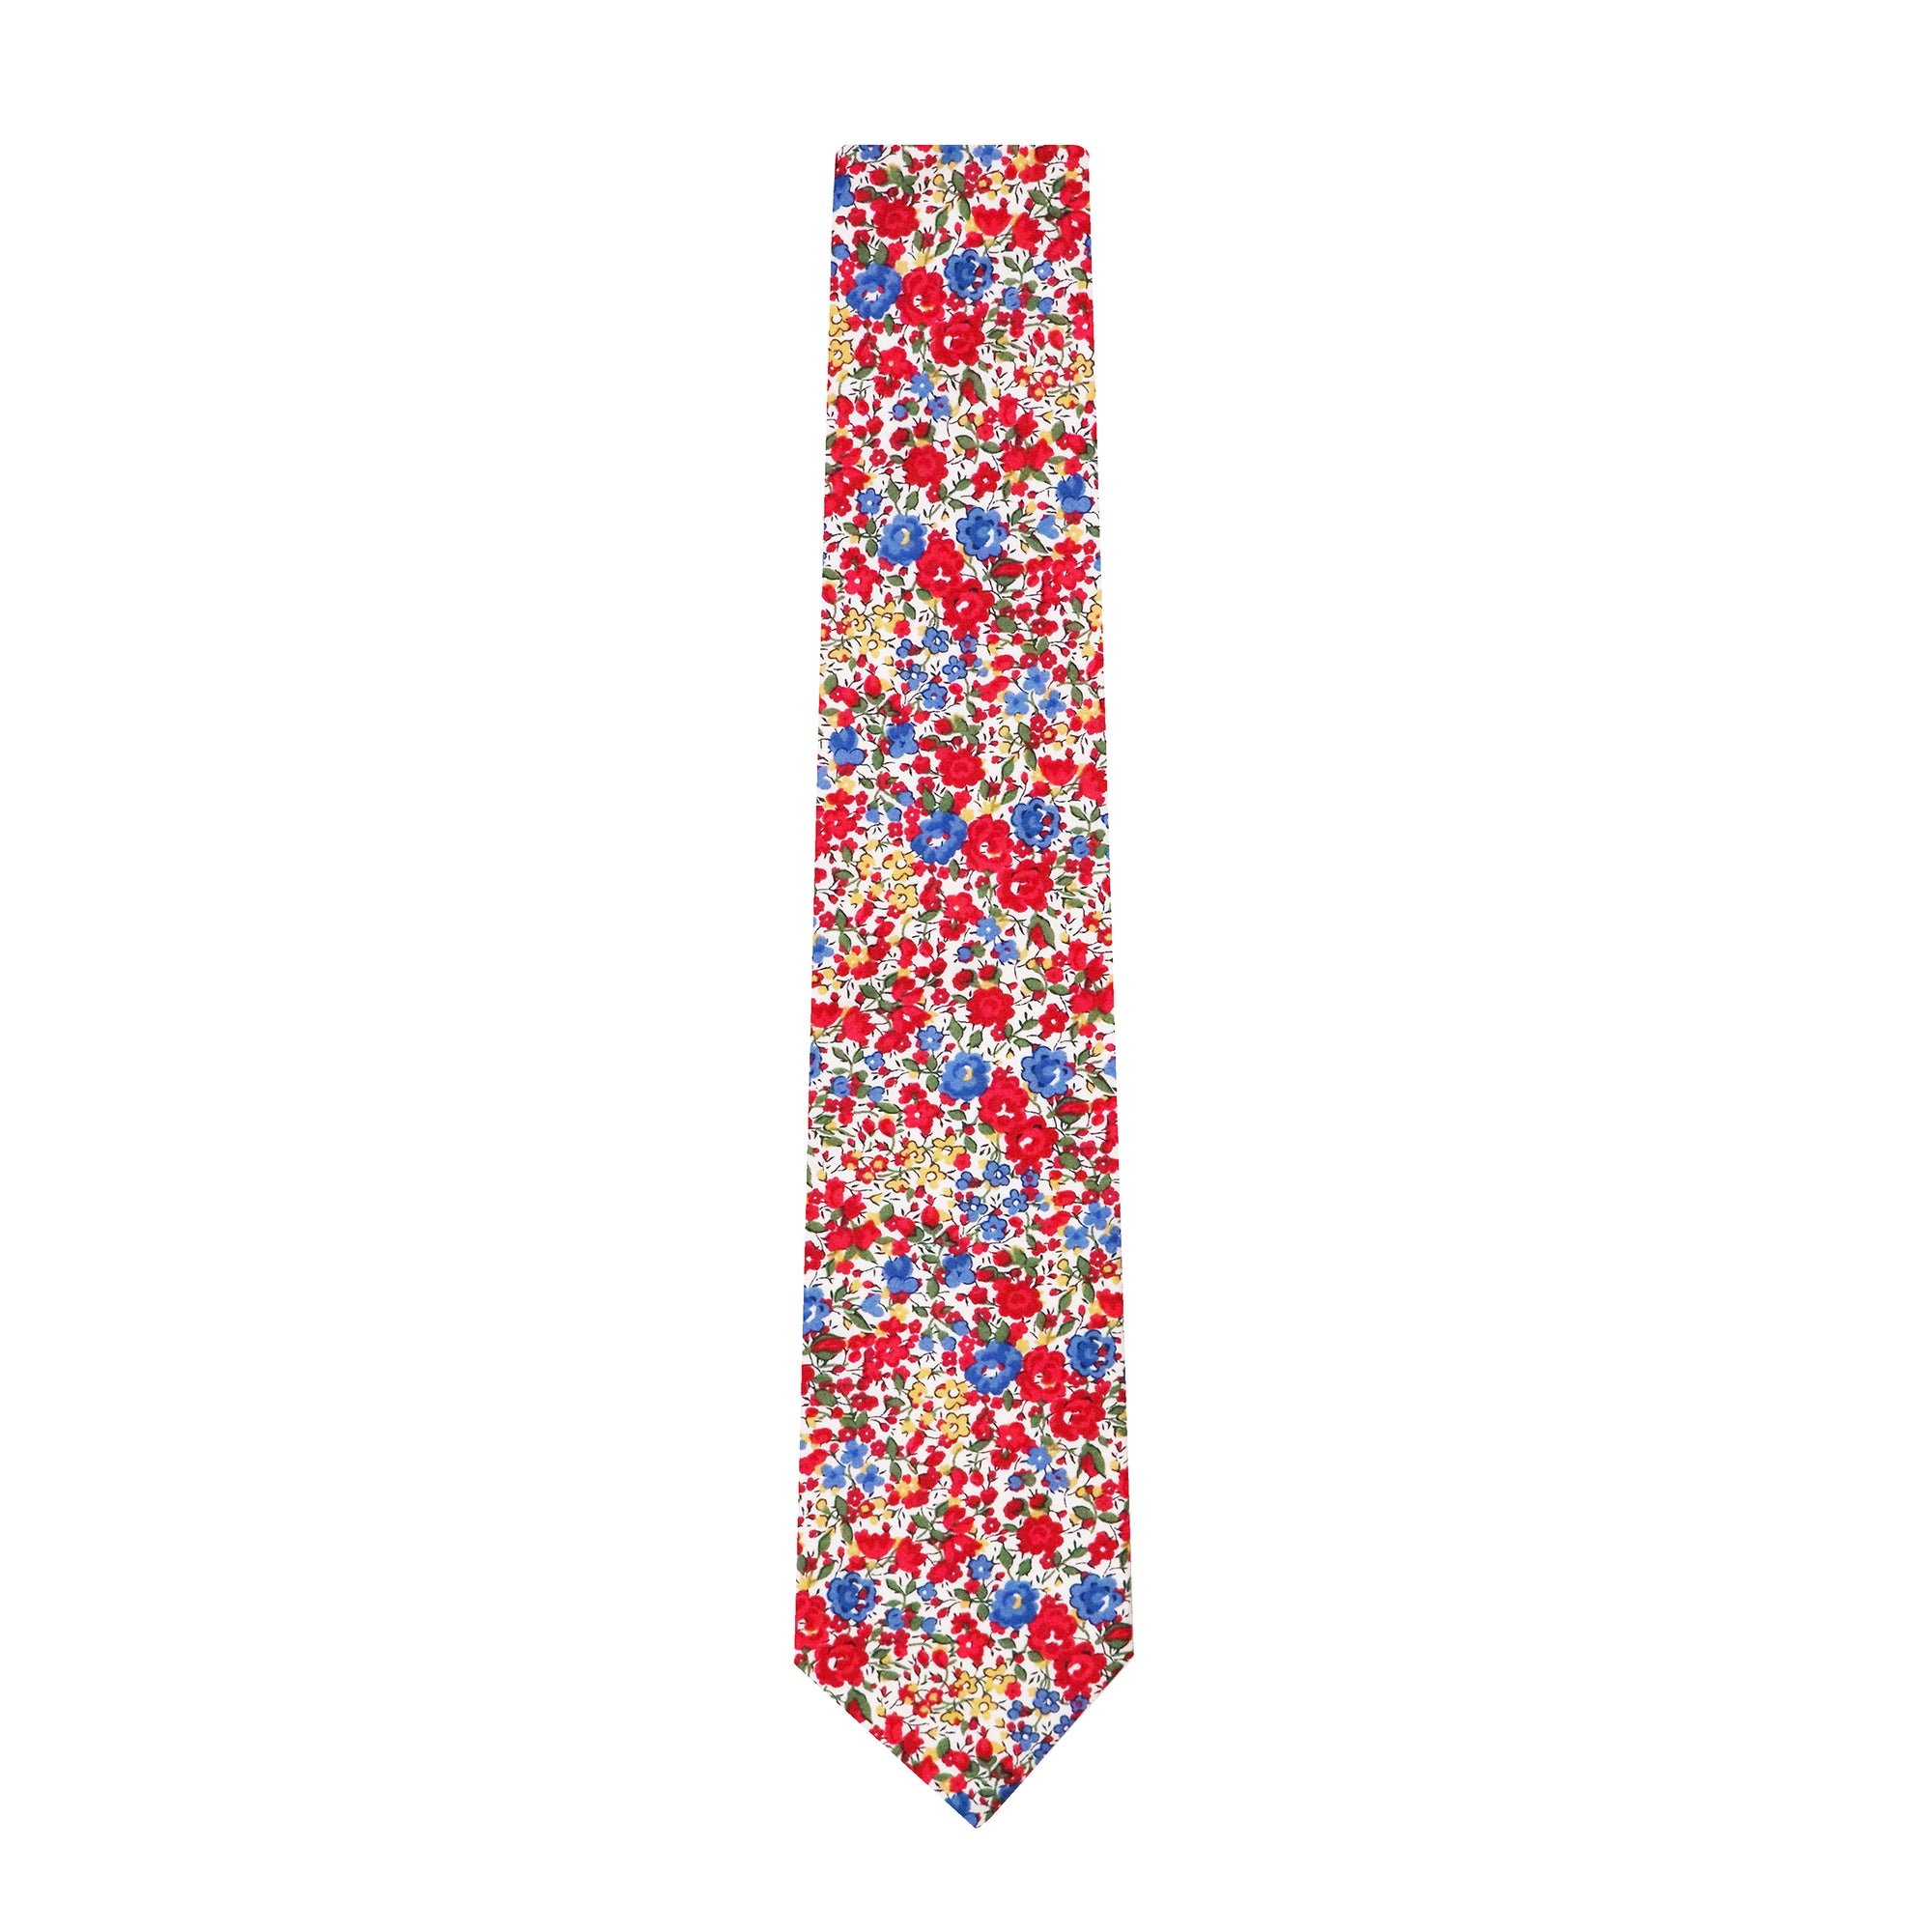 Liberty cotton classic floral tie made in New Zealand by Parisian in Emma and Georgina Design